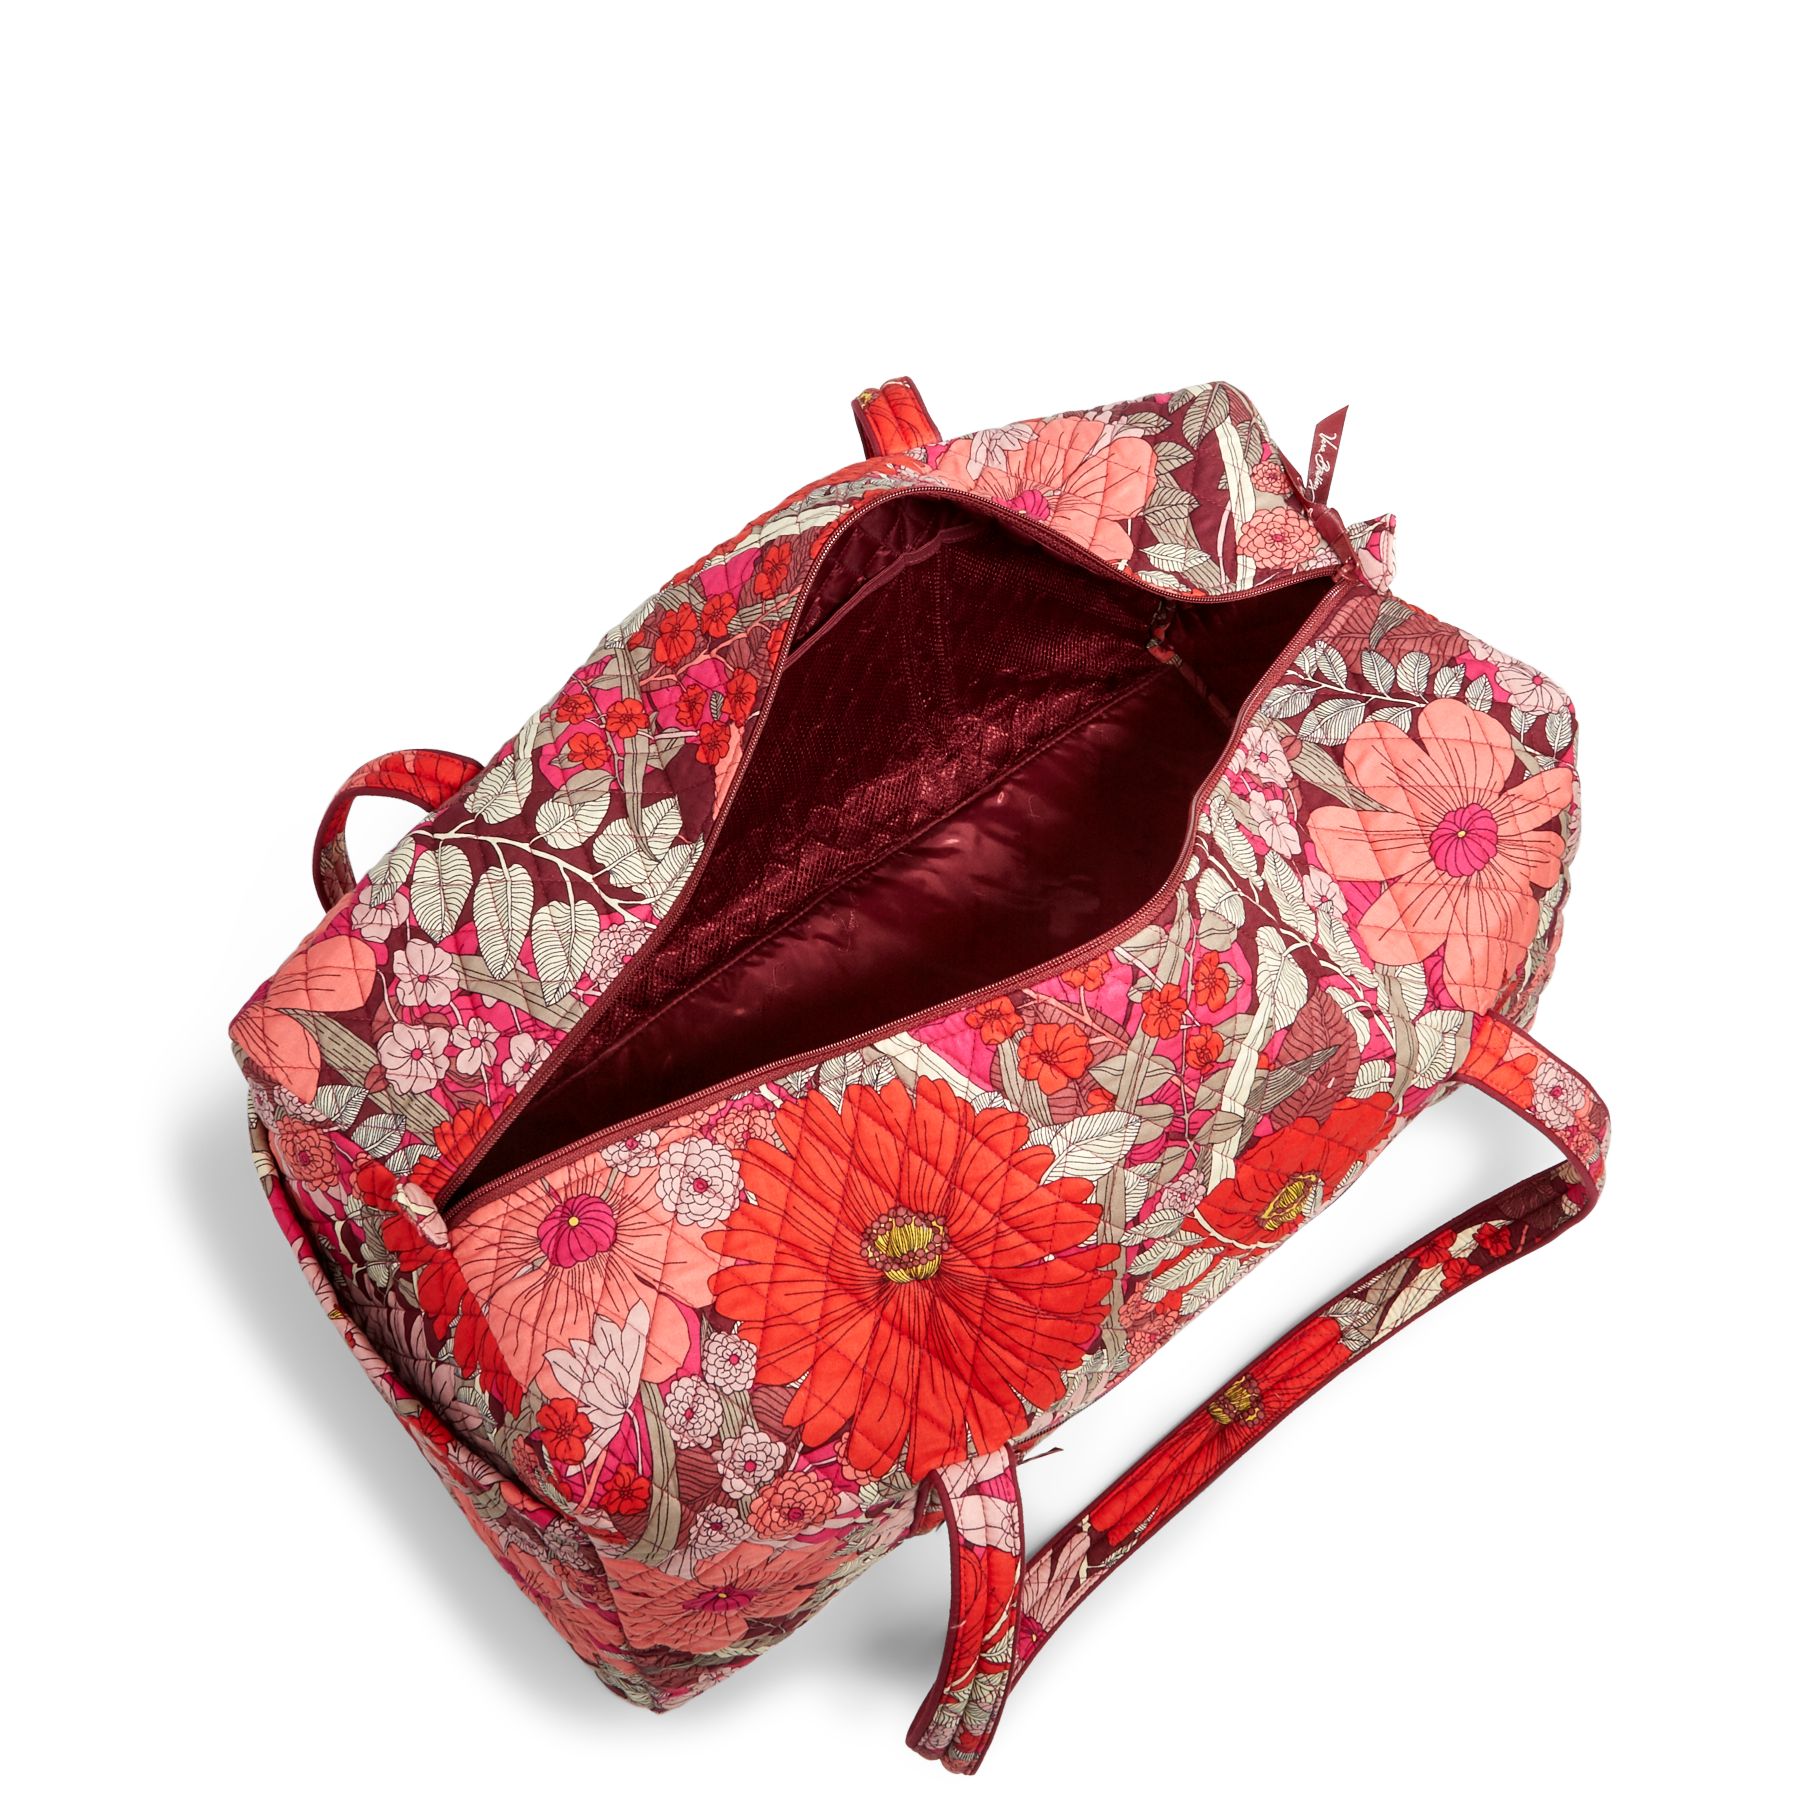 Vera Bradley Coupon Code With Travel Bags For Women